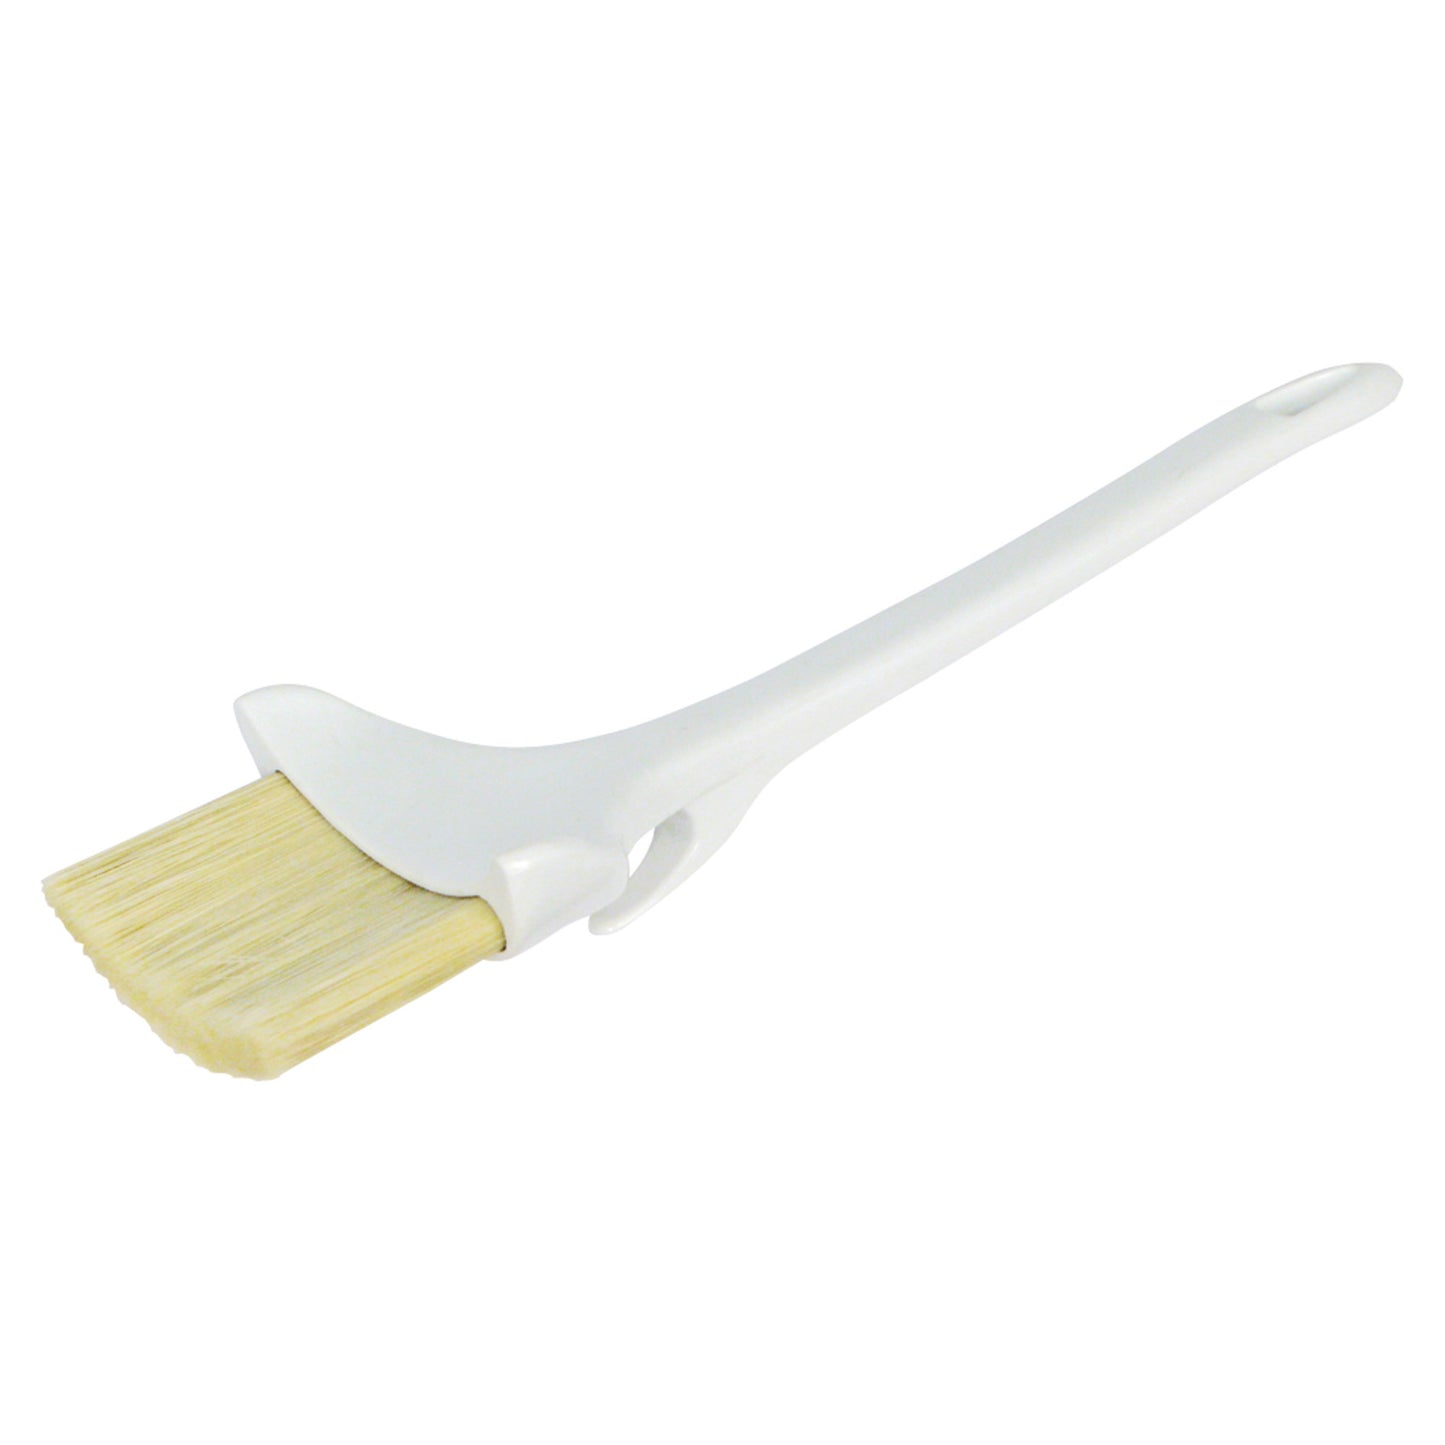 WBRP-30H - Pastry/Basting Brush with Hook and 3" Wide Concave Head